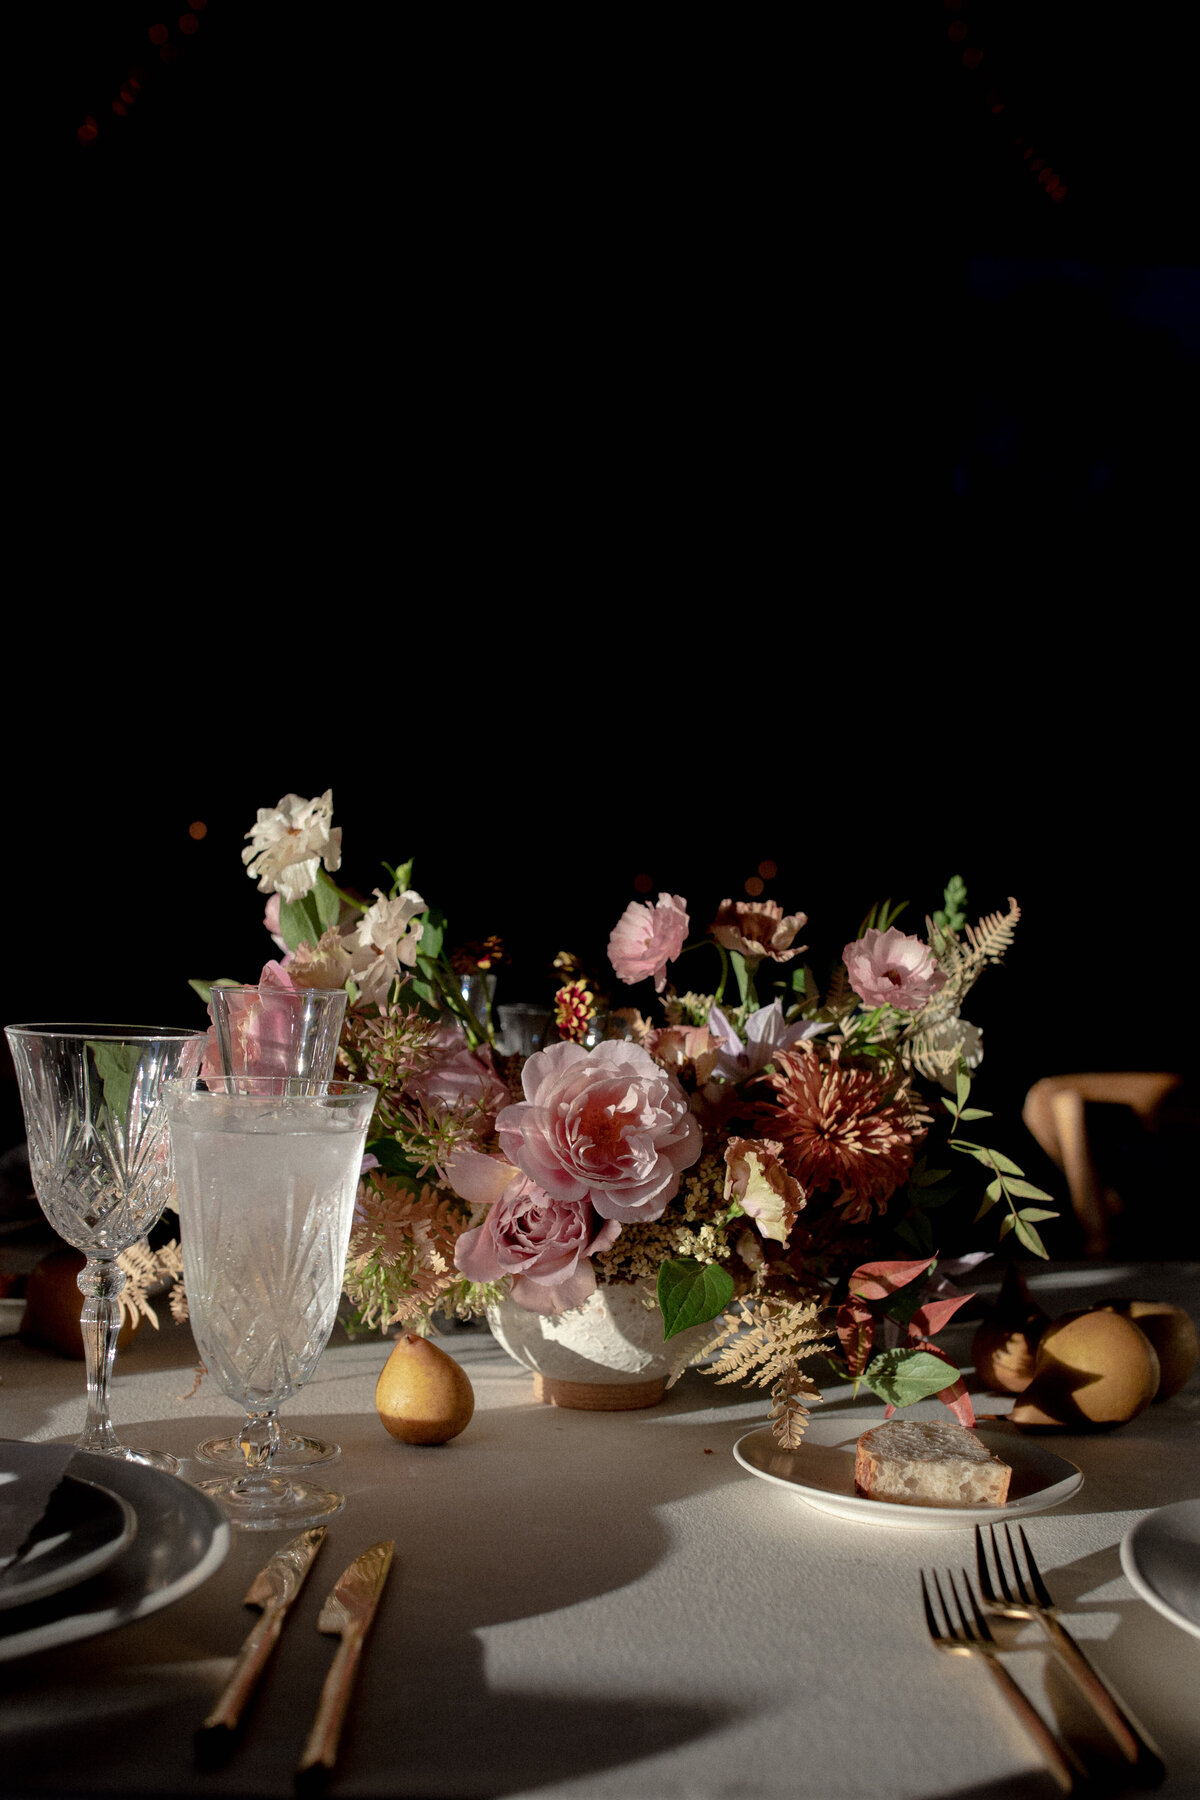 Dutch-inspired wedding centerpiece with gold flatware, crystal glasses, pears, and a bold bouquet with dramatic lighting.